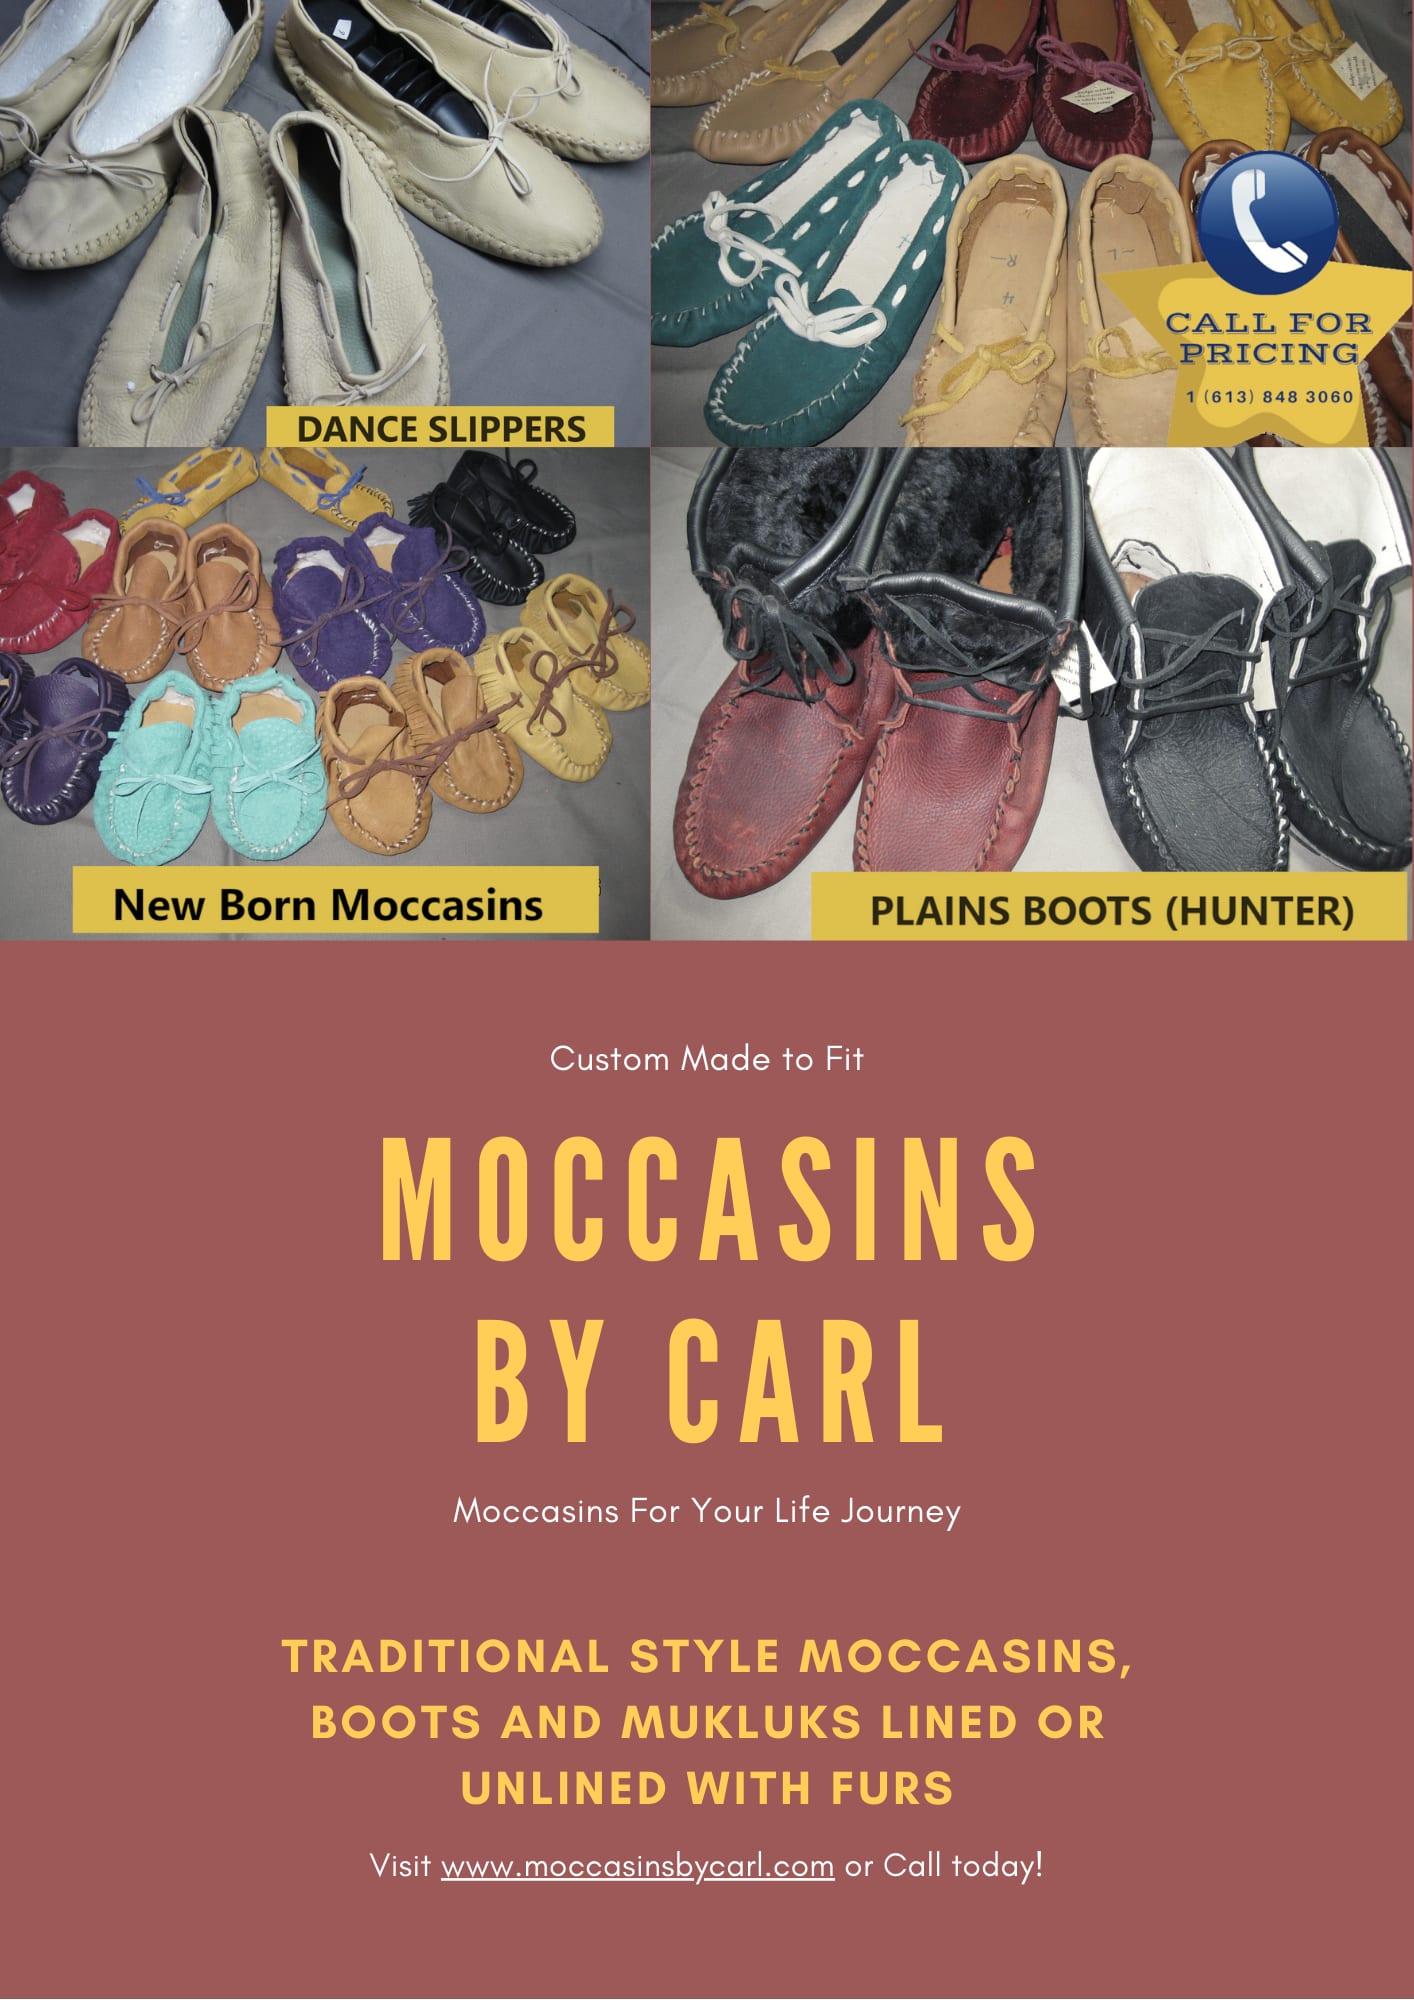 Moccasins by Carl